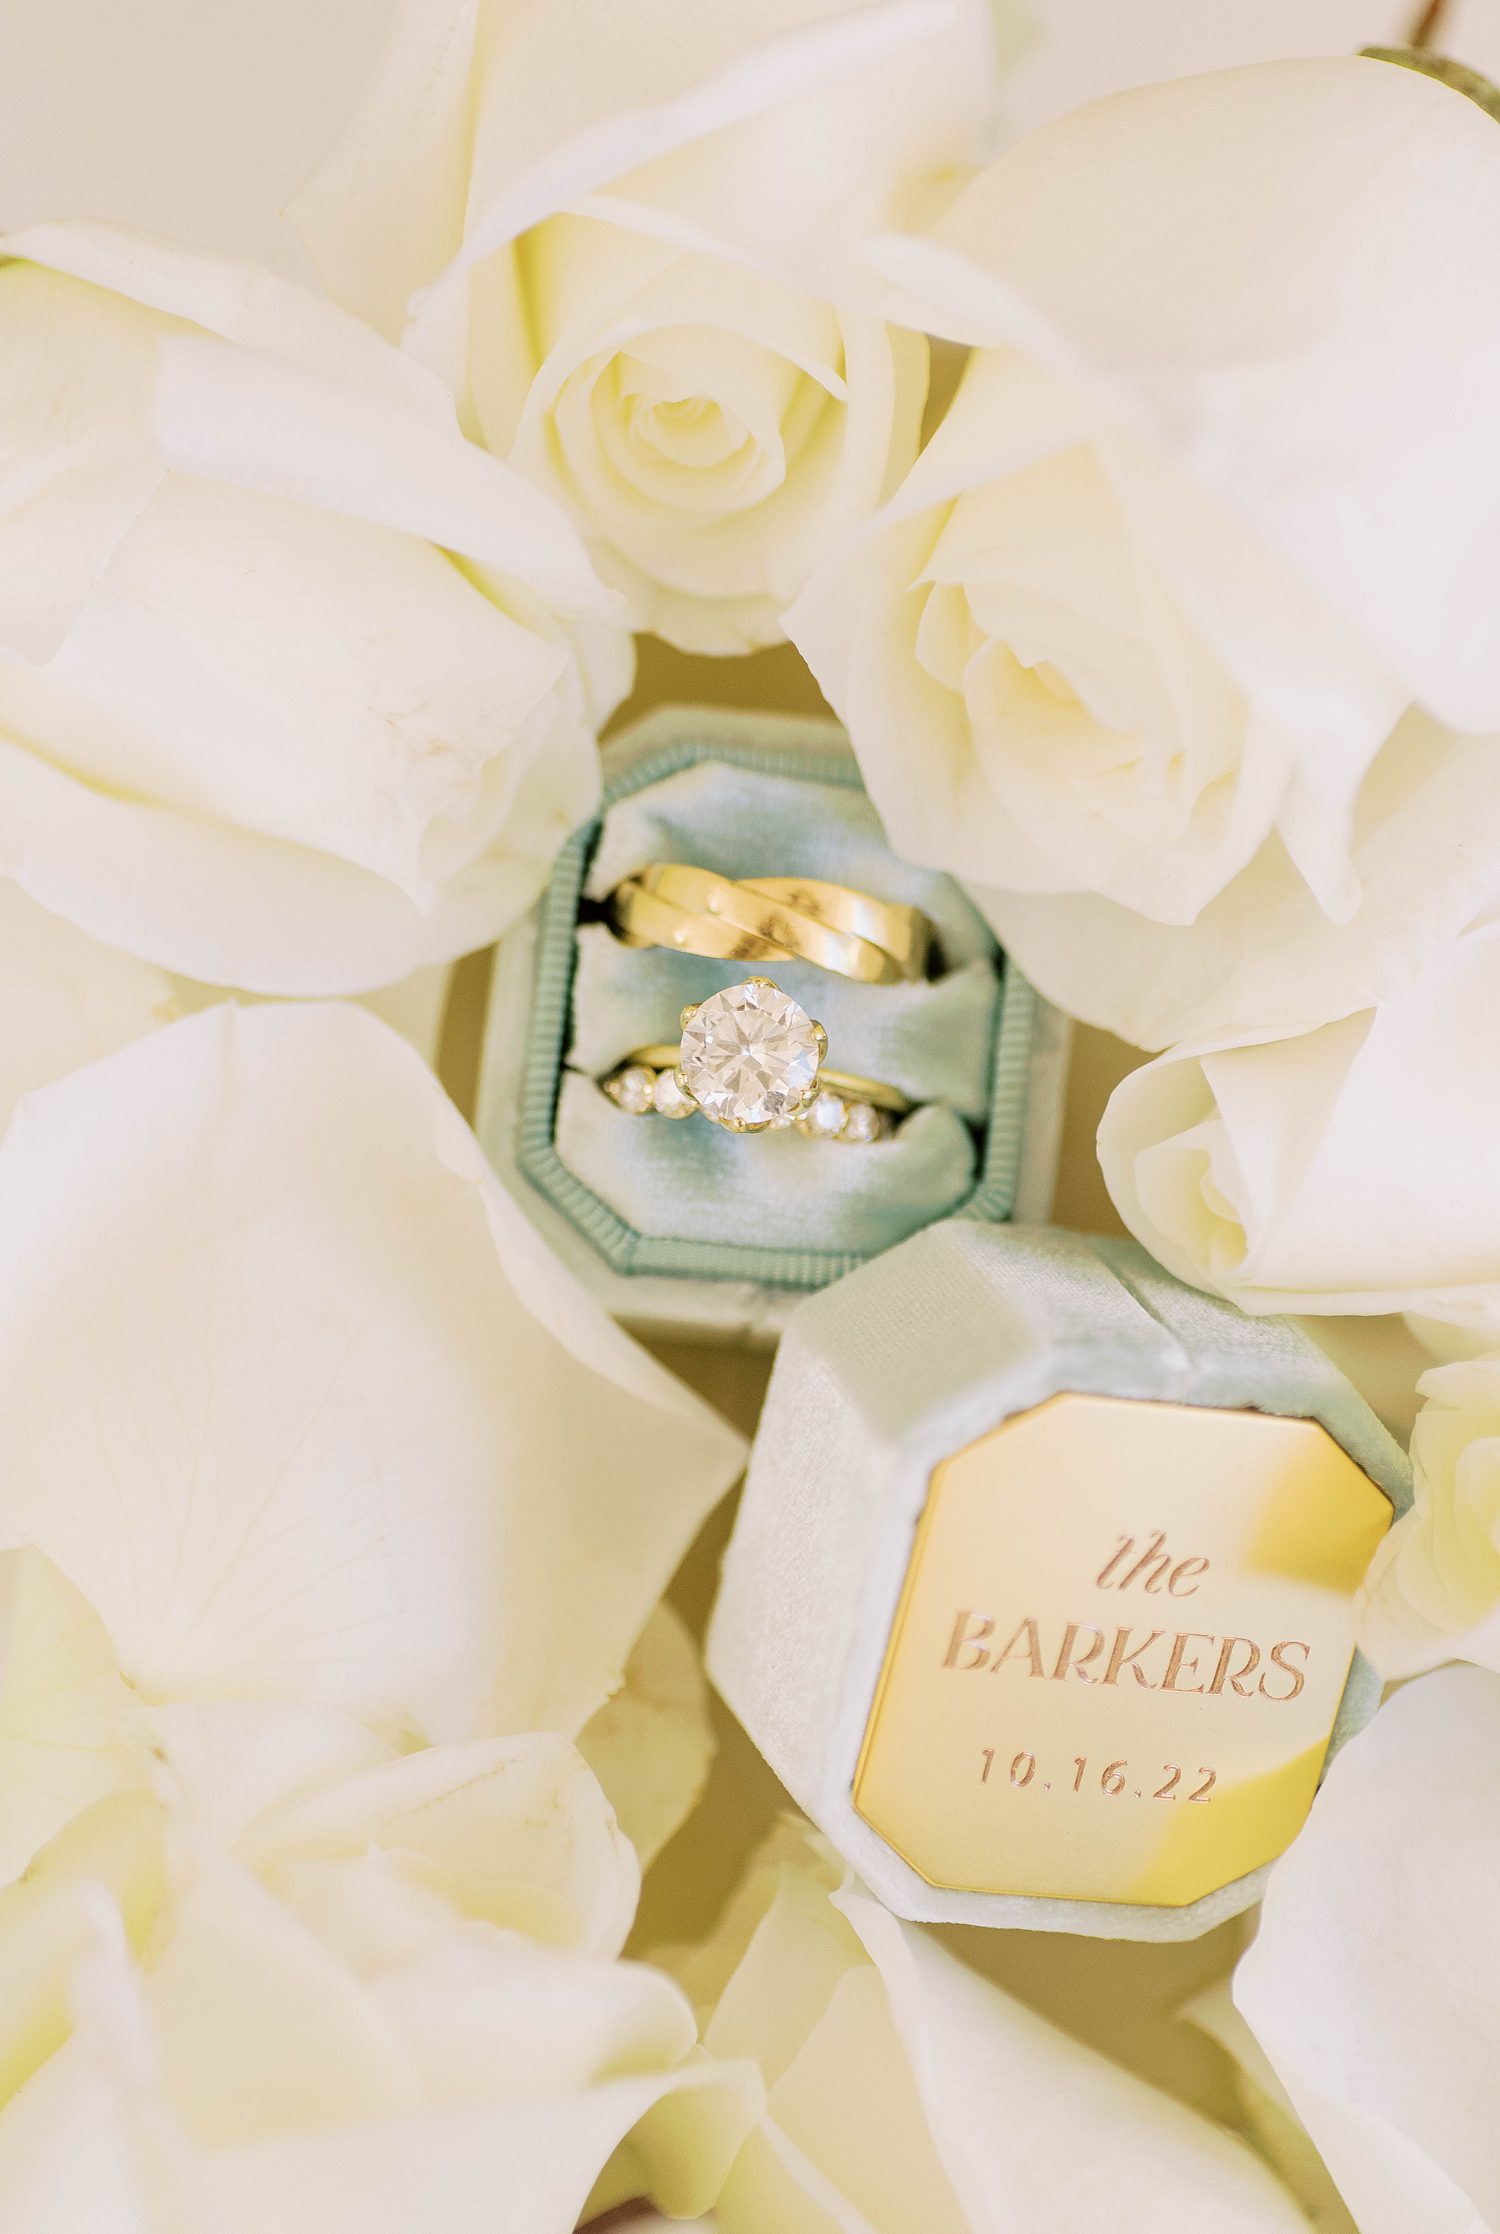 gold wedding bands rest in blue box among ivory roses